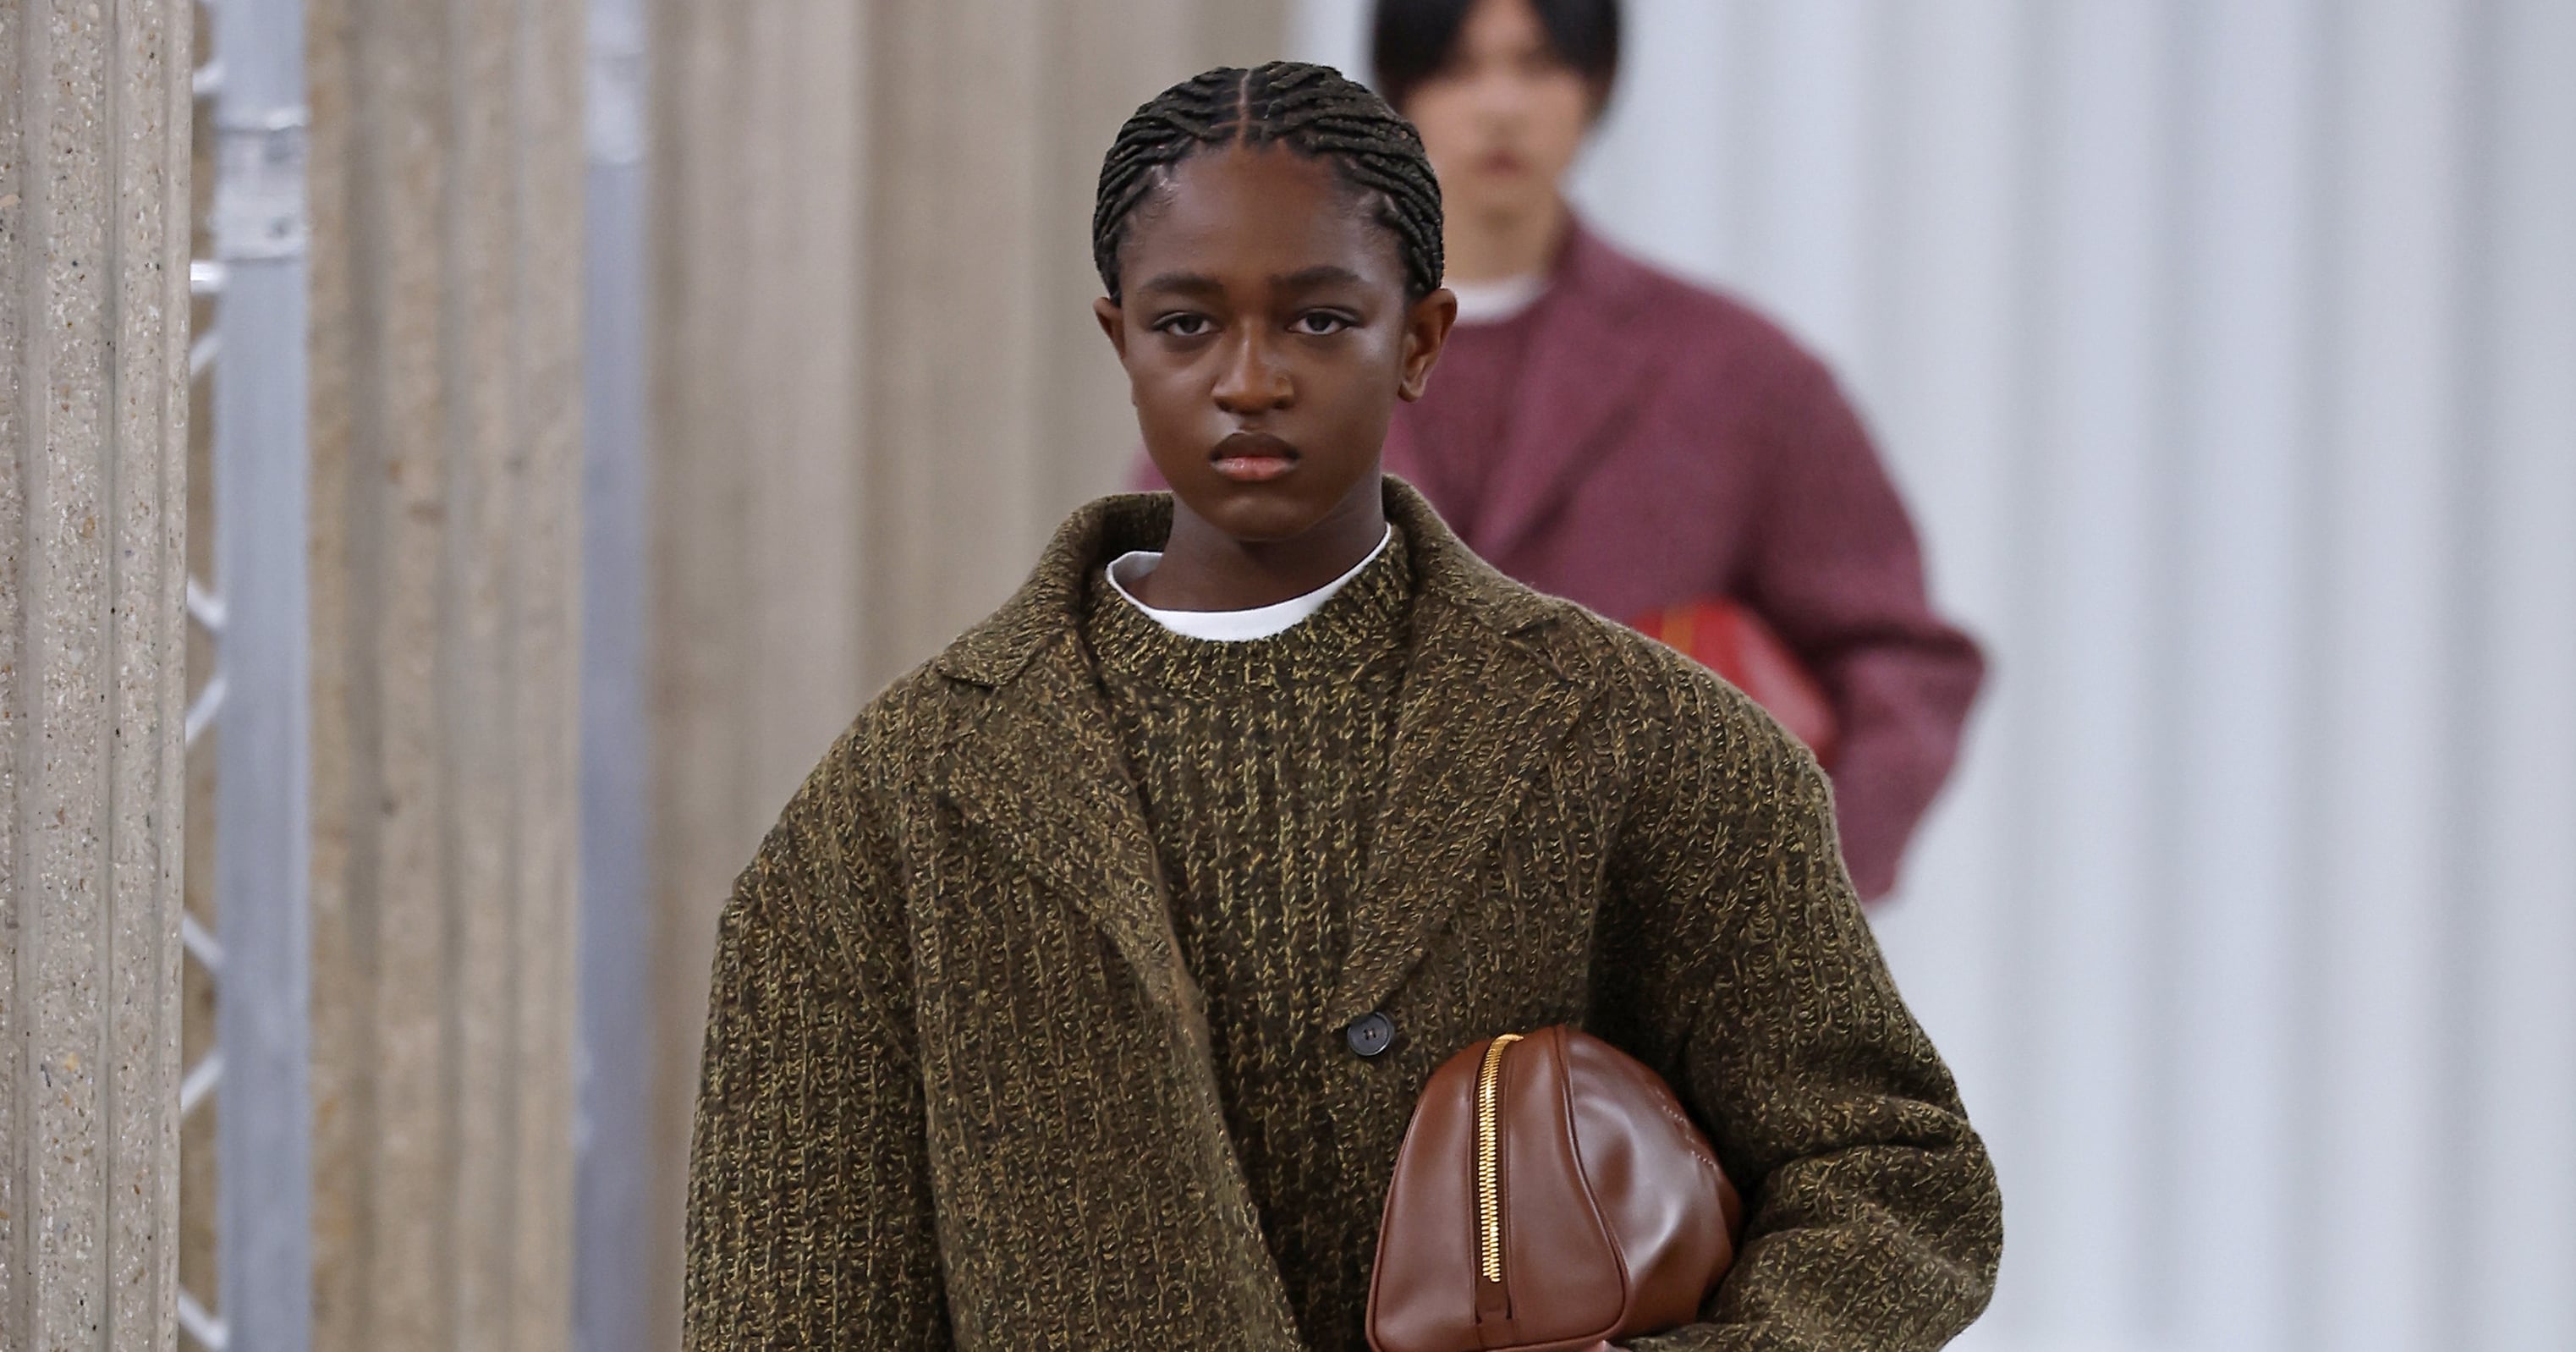 Jaden Smith Wows in a Crop Top and Dollhouse Purse at PFW